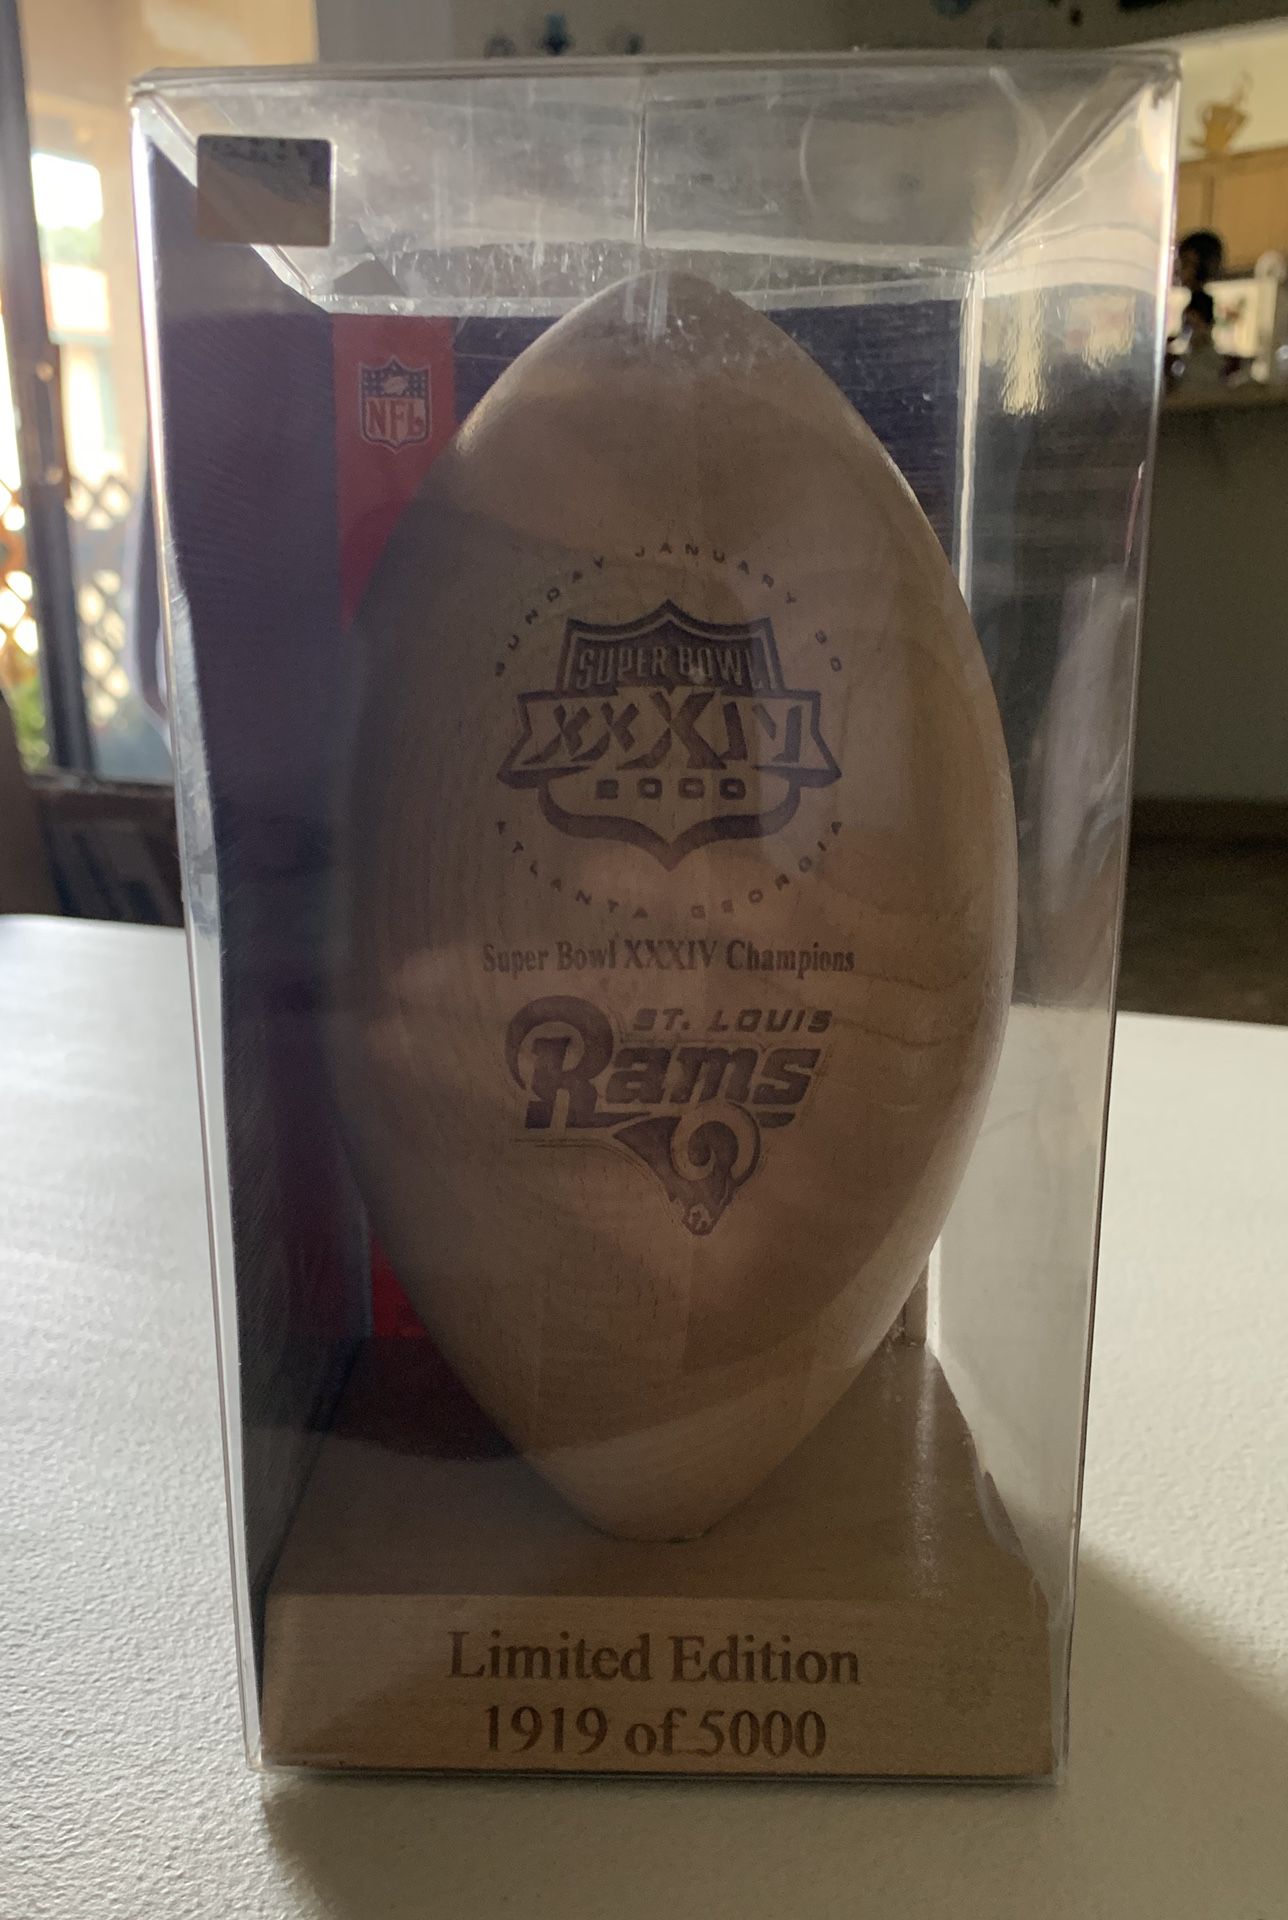 St. Louis Rams Super Bowl XXXIV Wooden Football Limited Edition 1919 of 5000